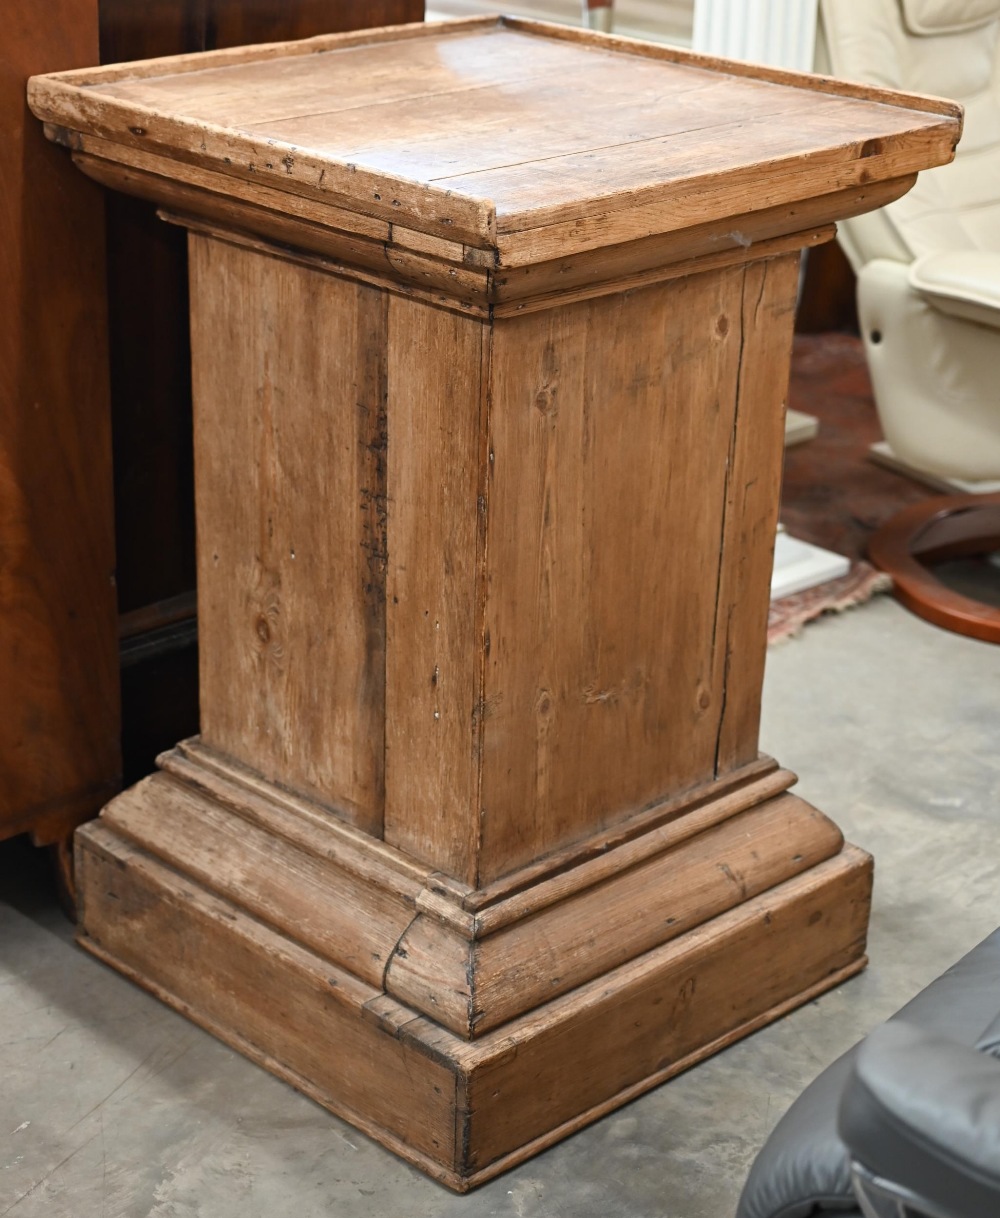 A large waxed pine square pedestal/stand 62 x 62 x 94 cm high